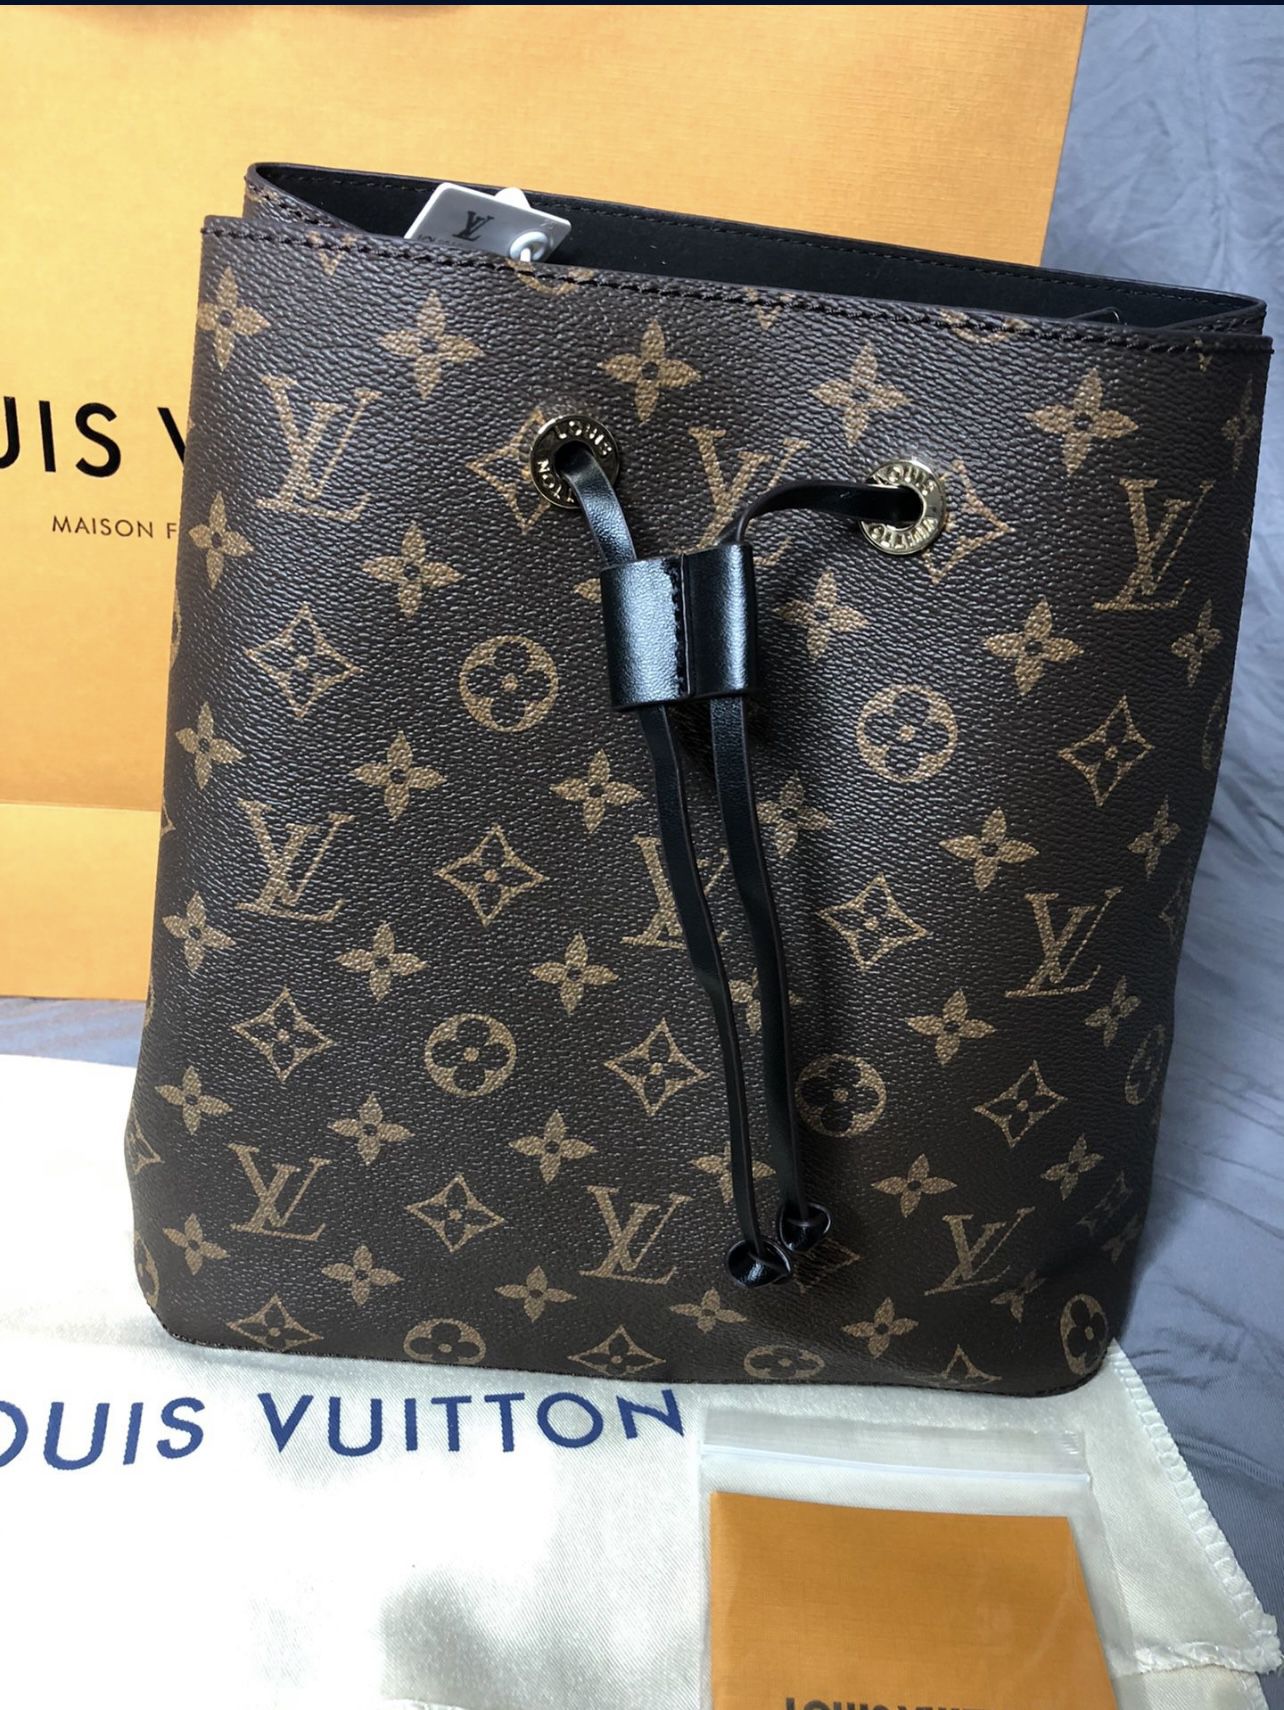 JW PEI Envelope Chain Crossbody for Sale in Northbrook, IL - OfferUp